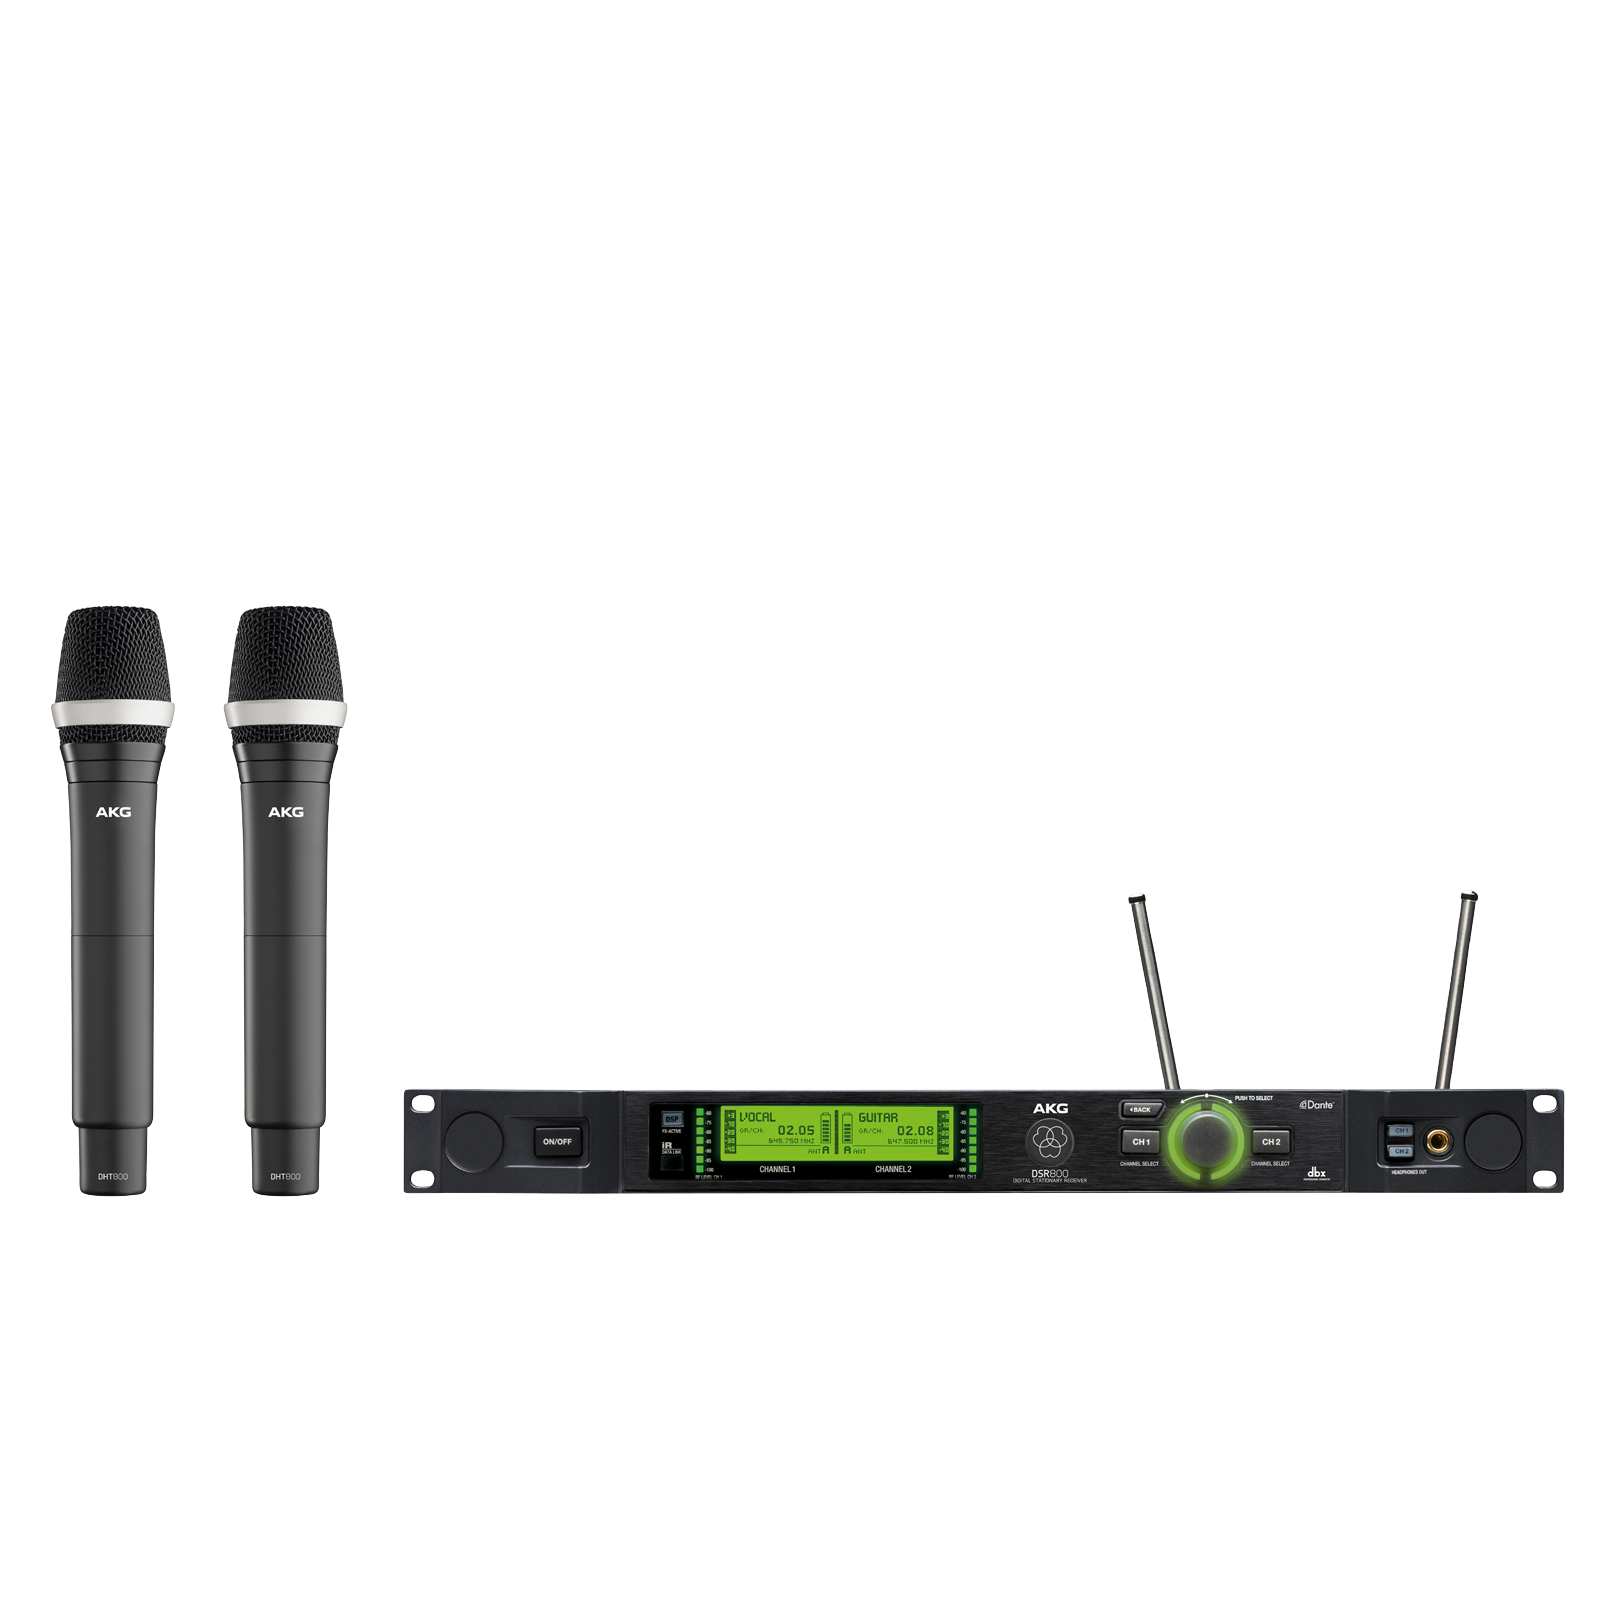 DMS800 Vocal Set D5 - Black - Reference digital wireless microphone system  - Hero